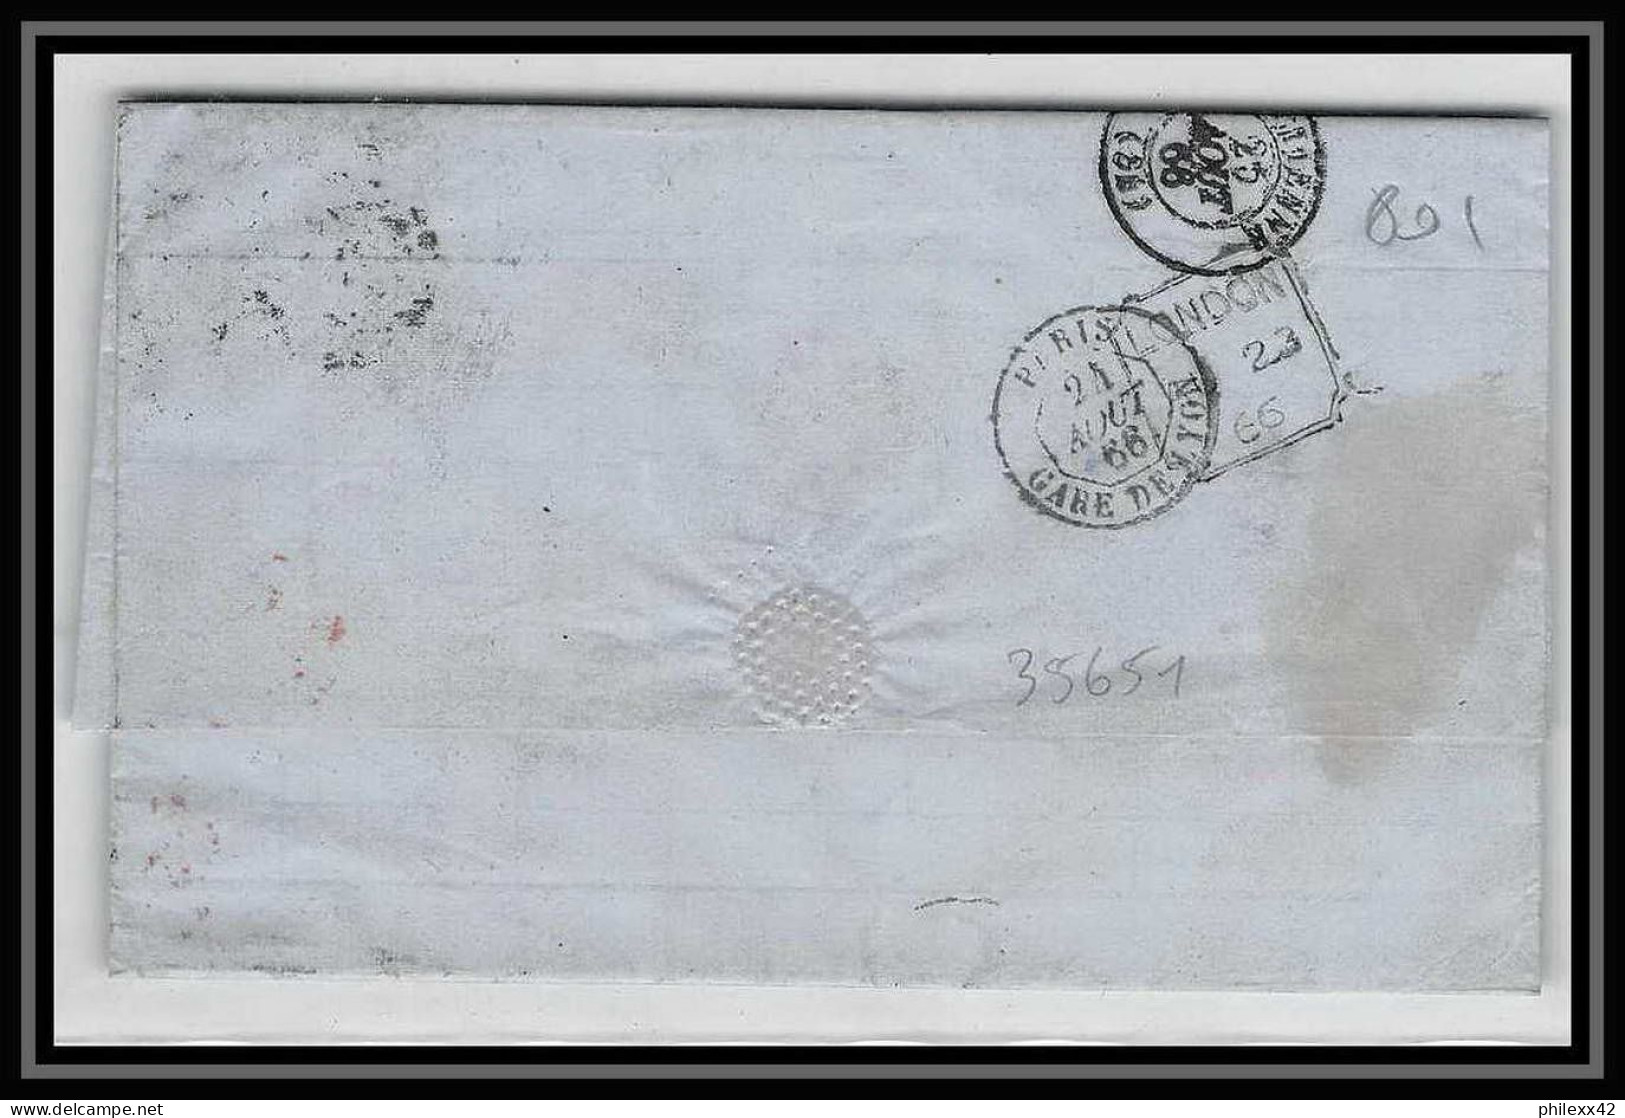 35651 N°32 Victoria 4p Red London St Etienne France 1866 Cachet 46 Lettre Cover Grande Bretagne England - Covers & Documents